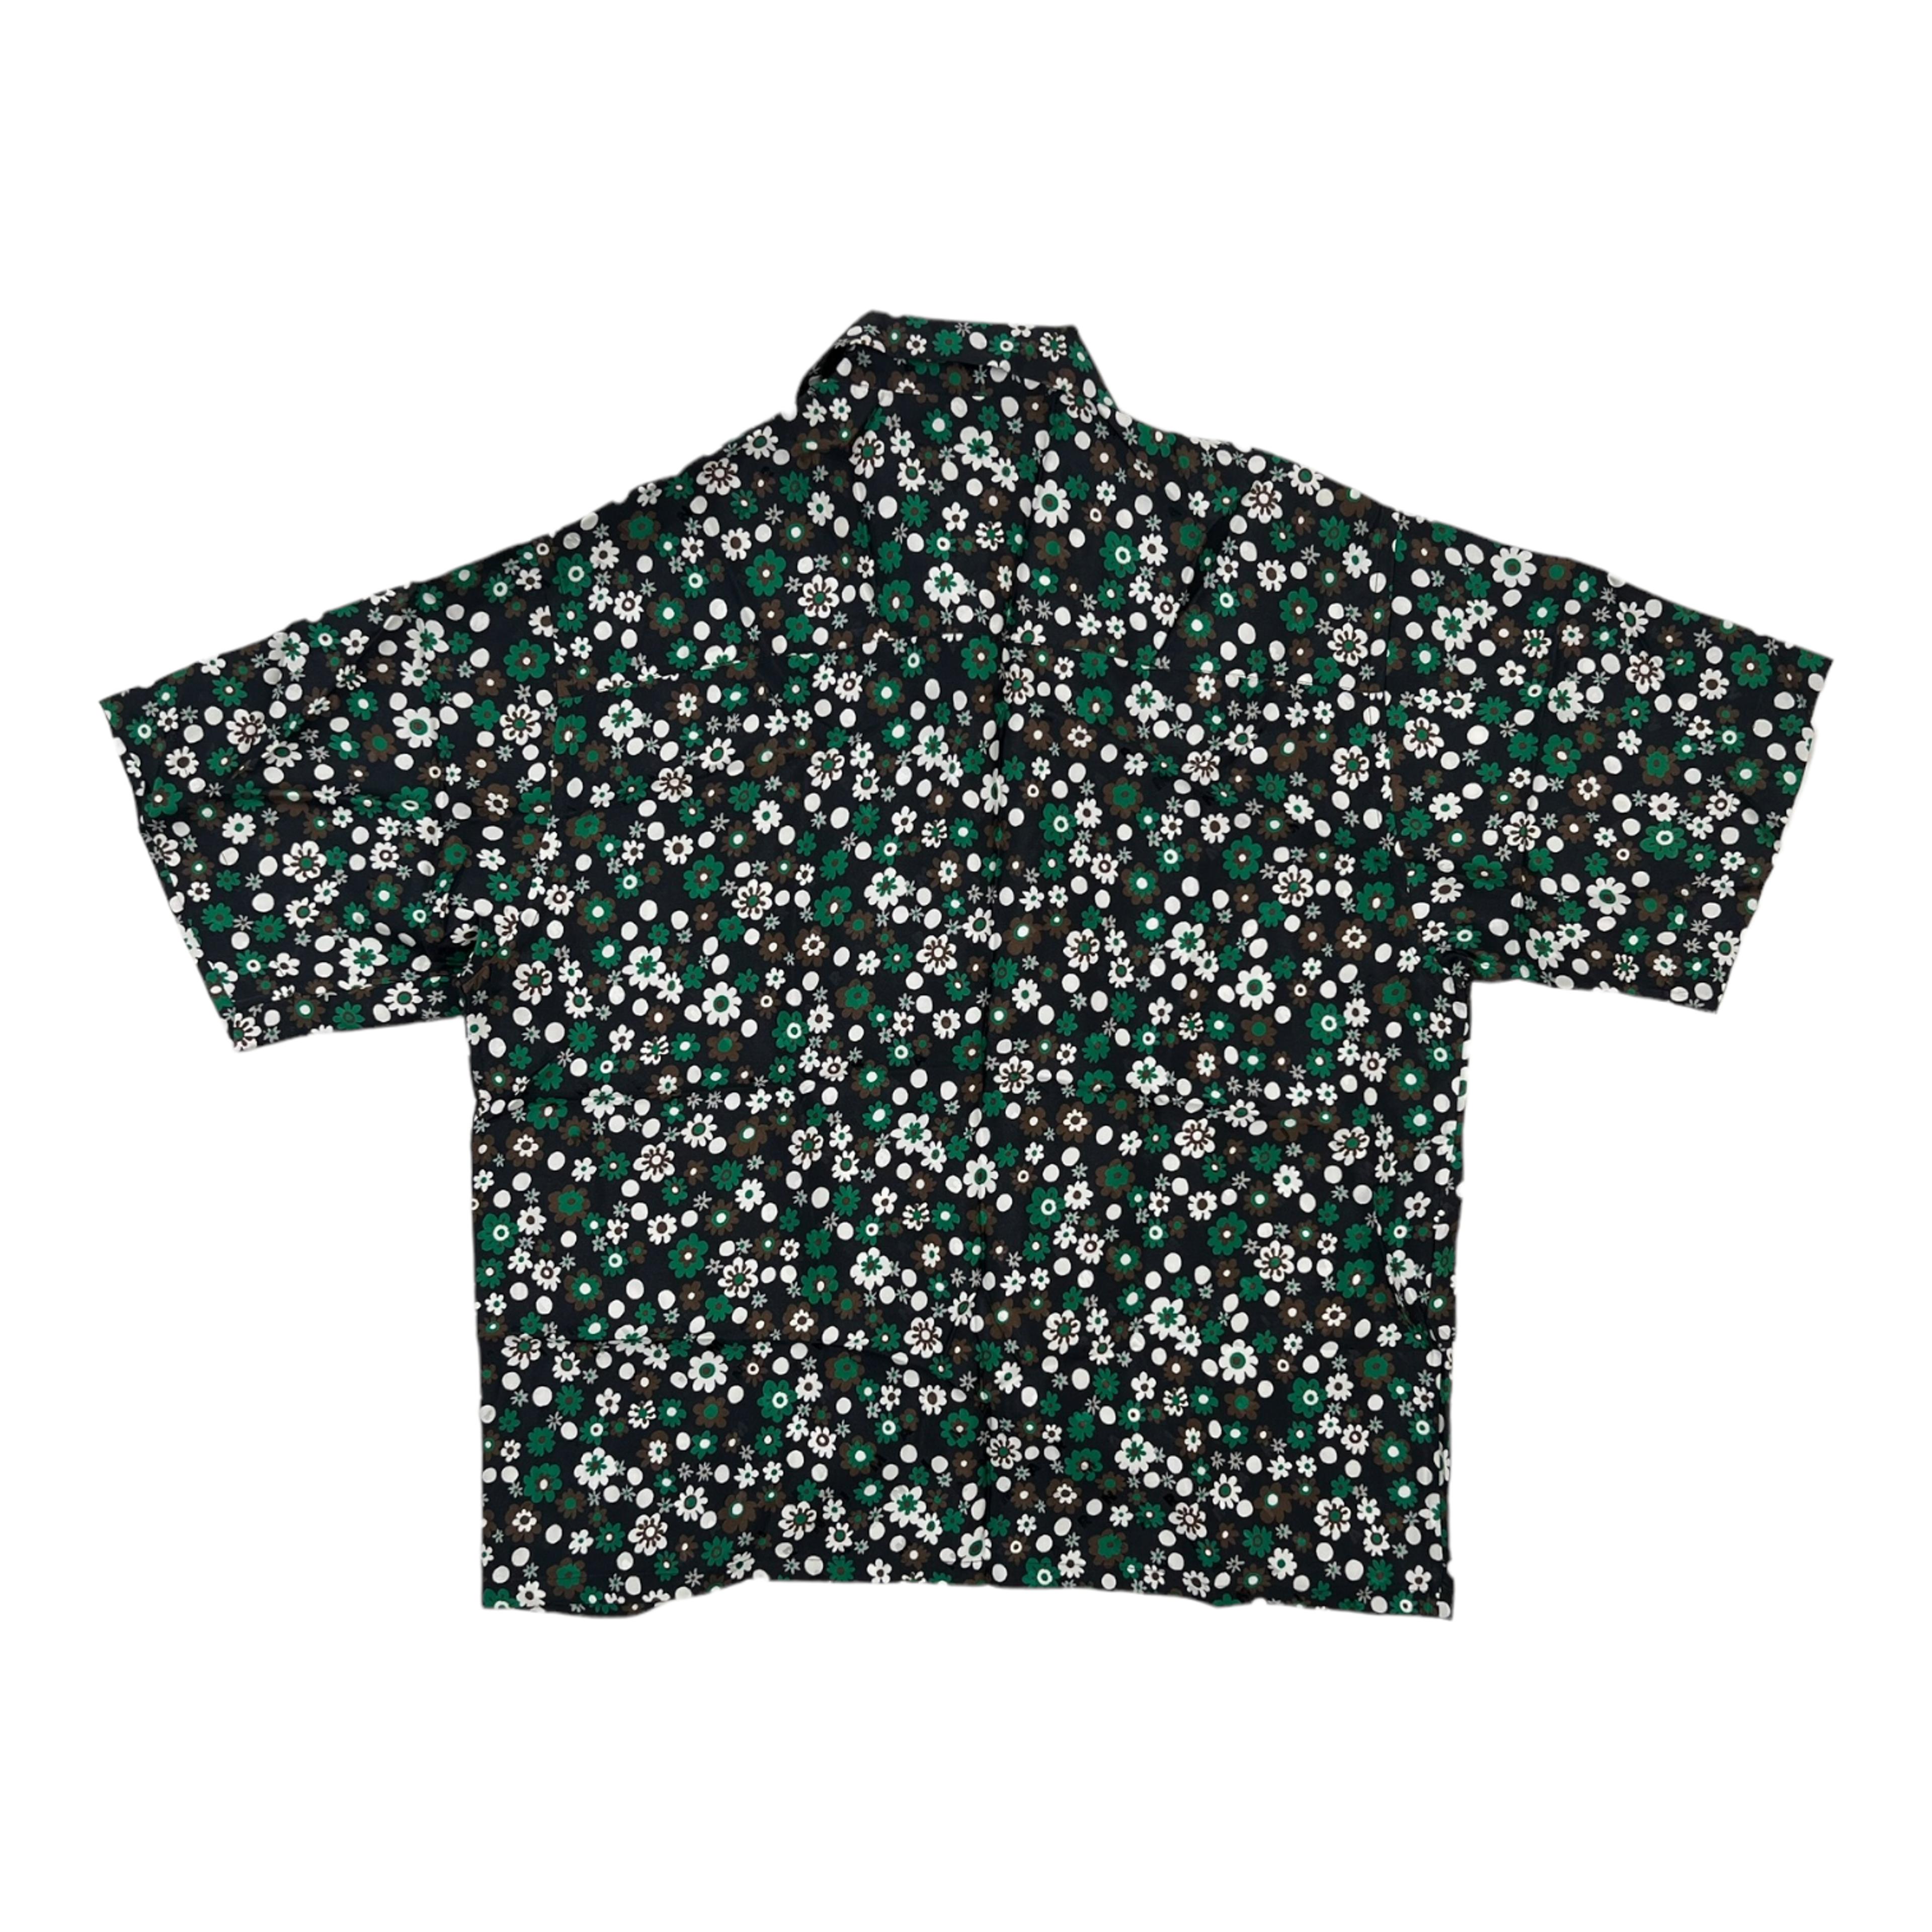 Alternate View 1 of Marni Small Flower Button Down Black Green Pre-Owned